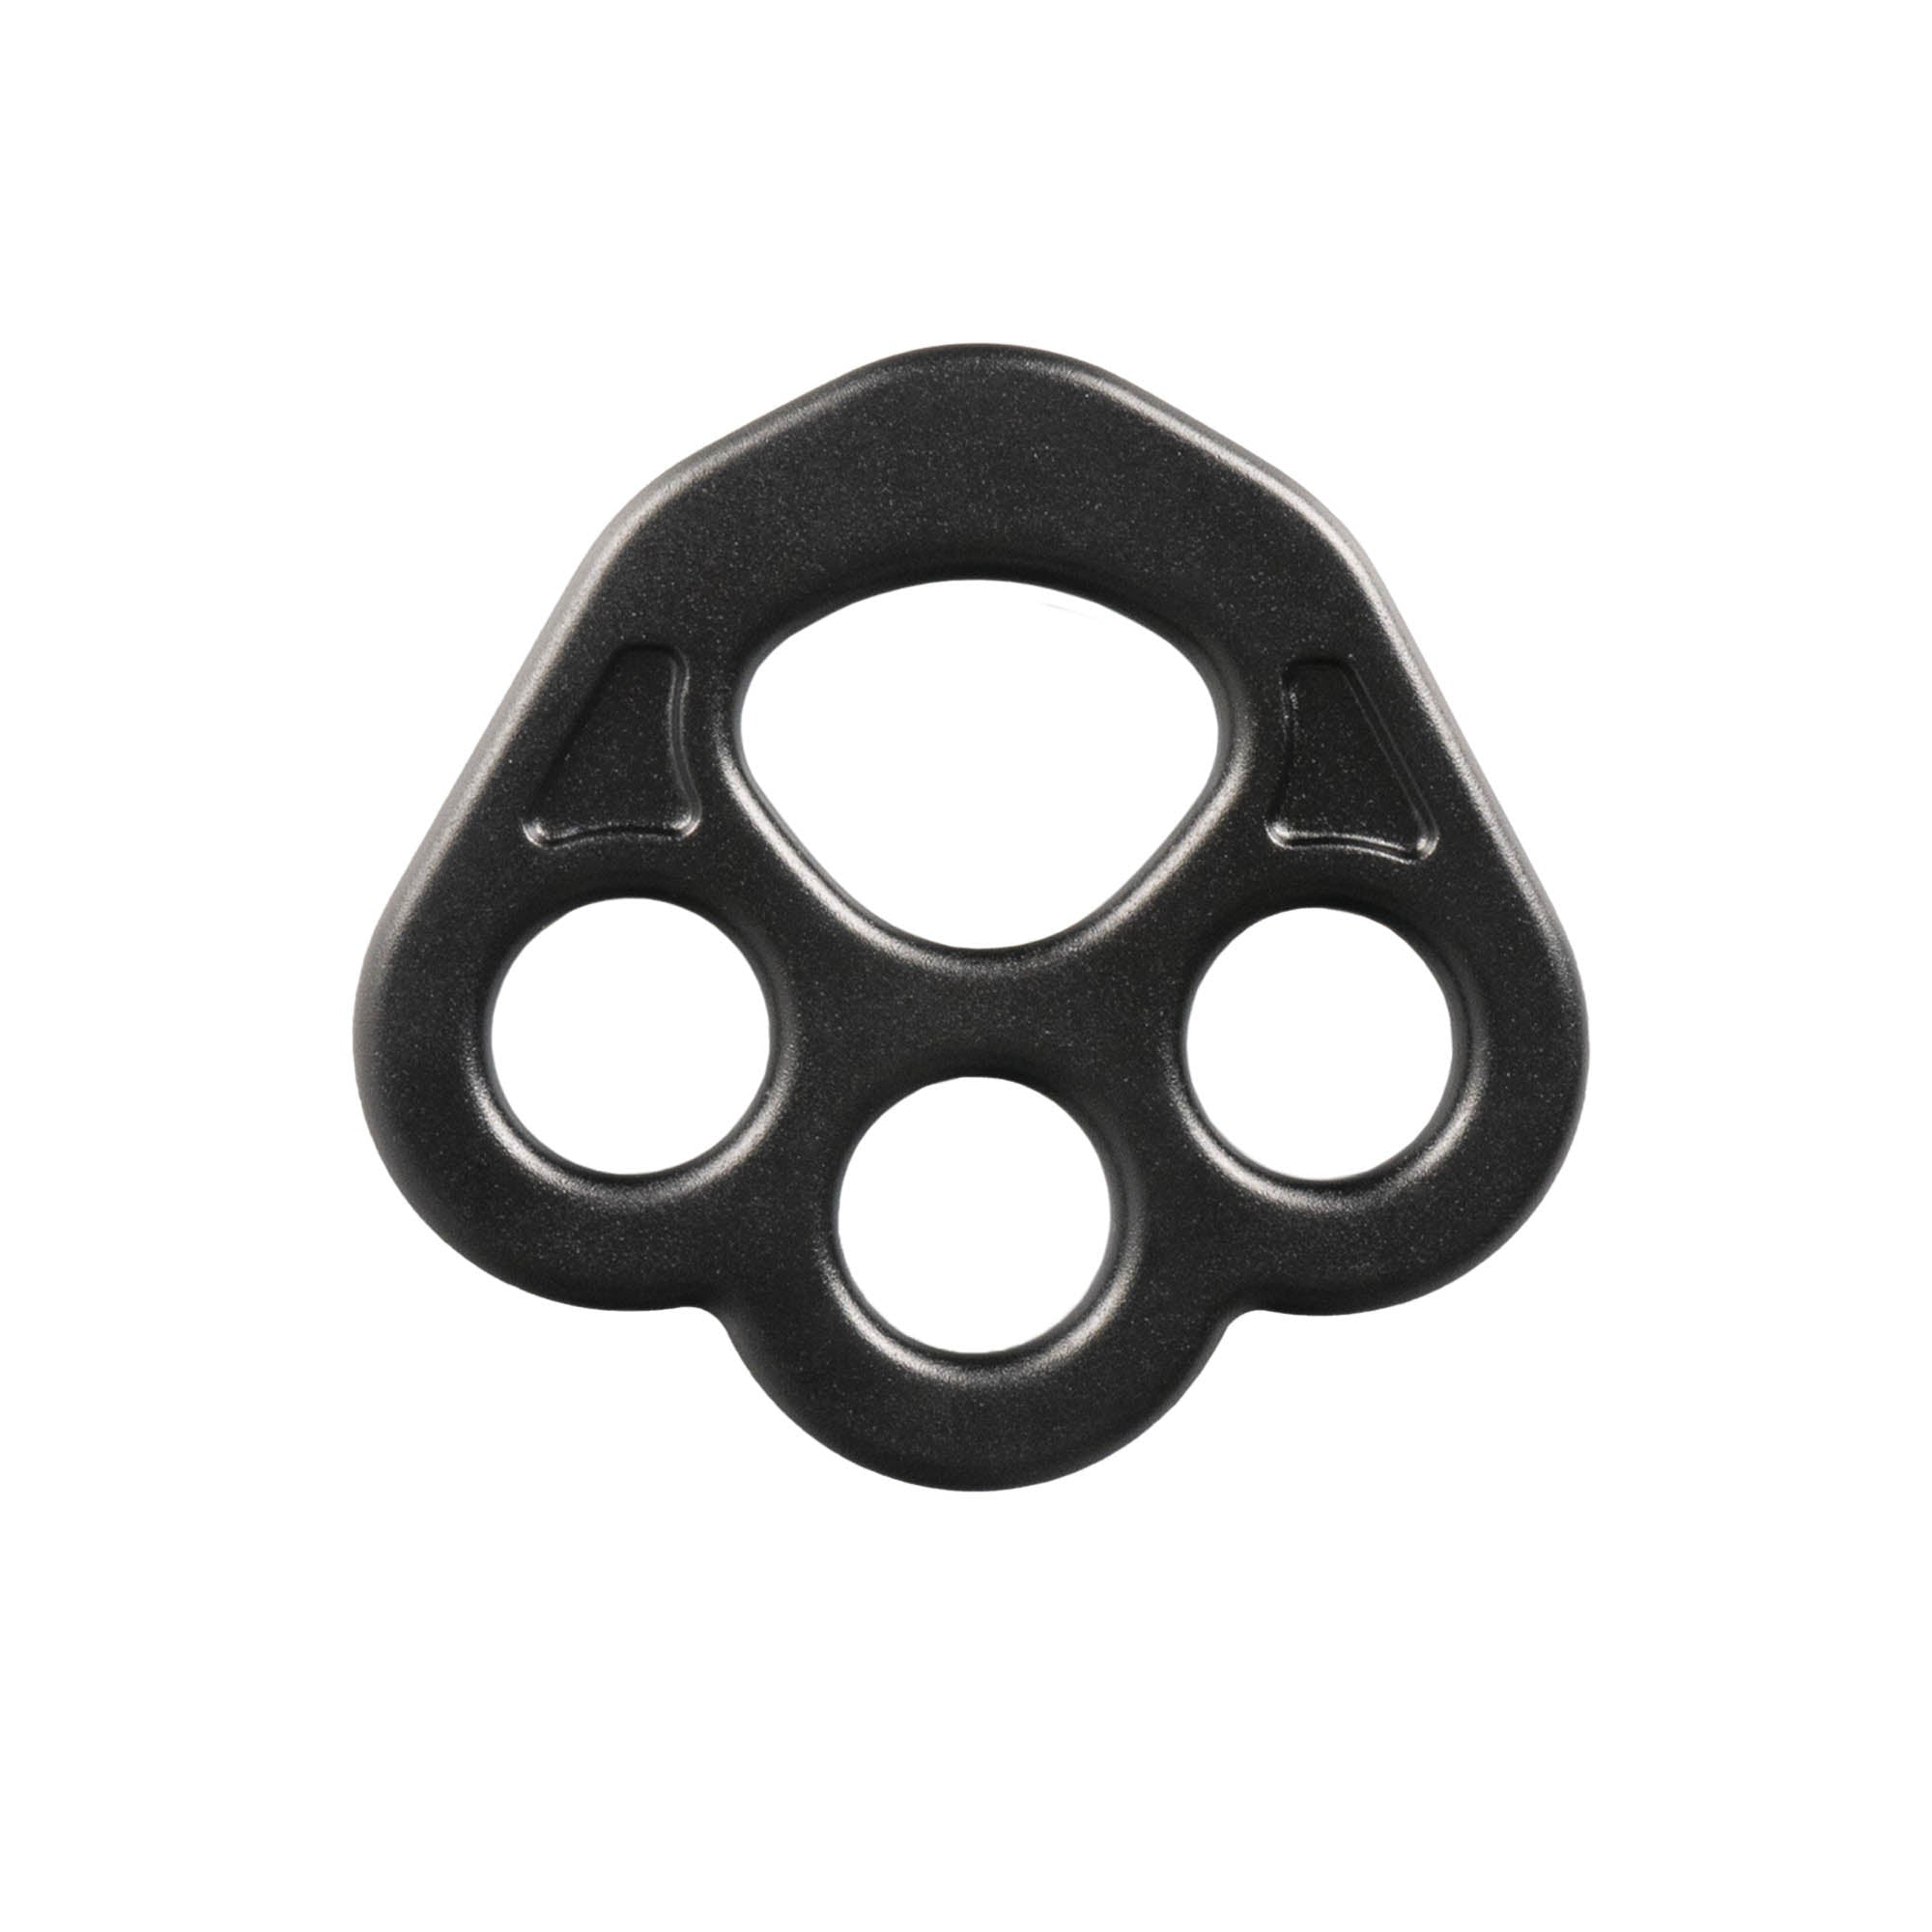 Prodigy 3 toe aerial rigging plate back